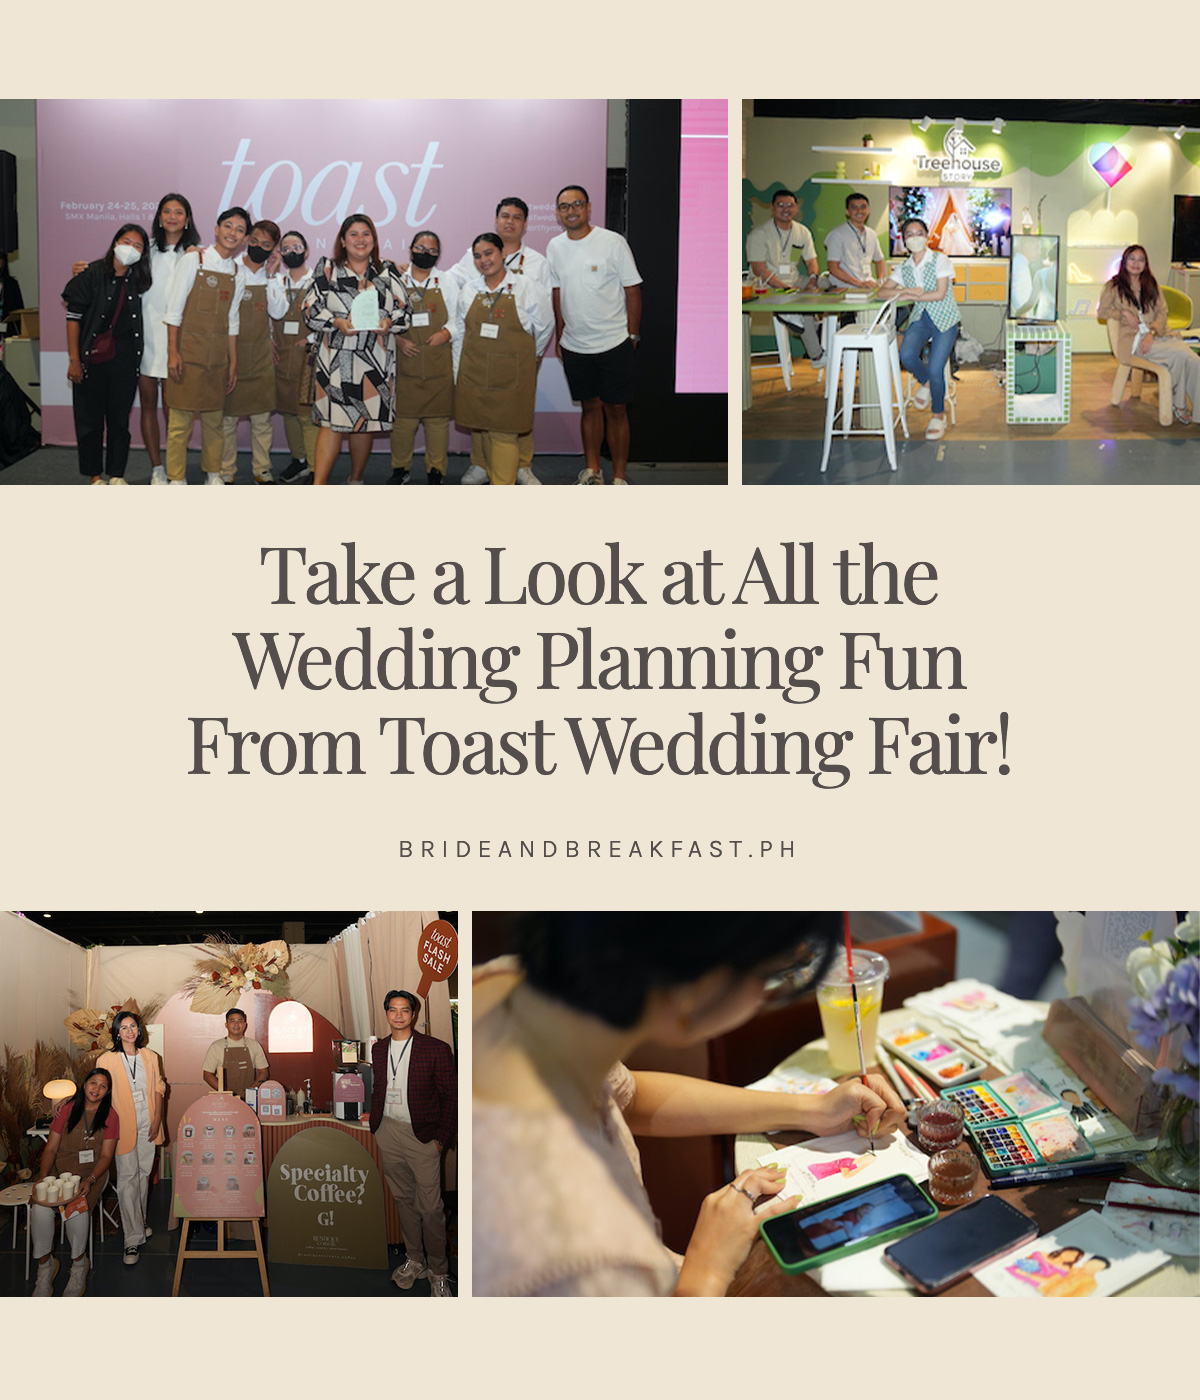 Take a Look at All the Wedding Planning Fun From Toast Wedding Fair